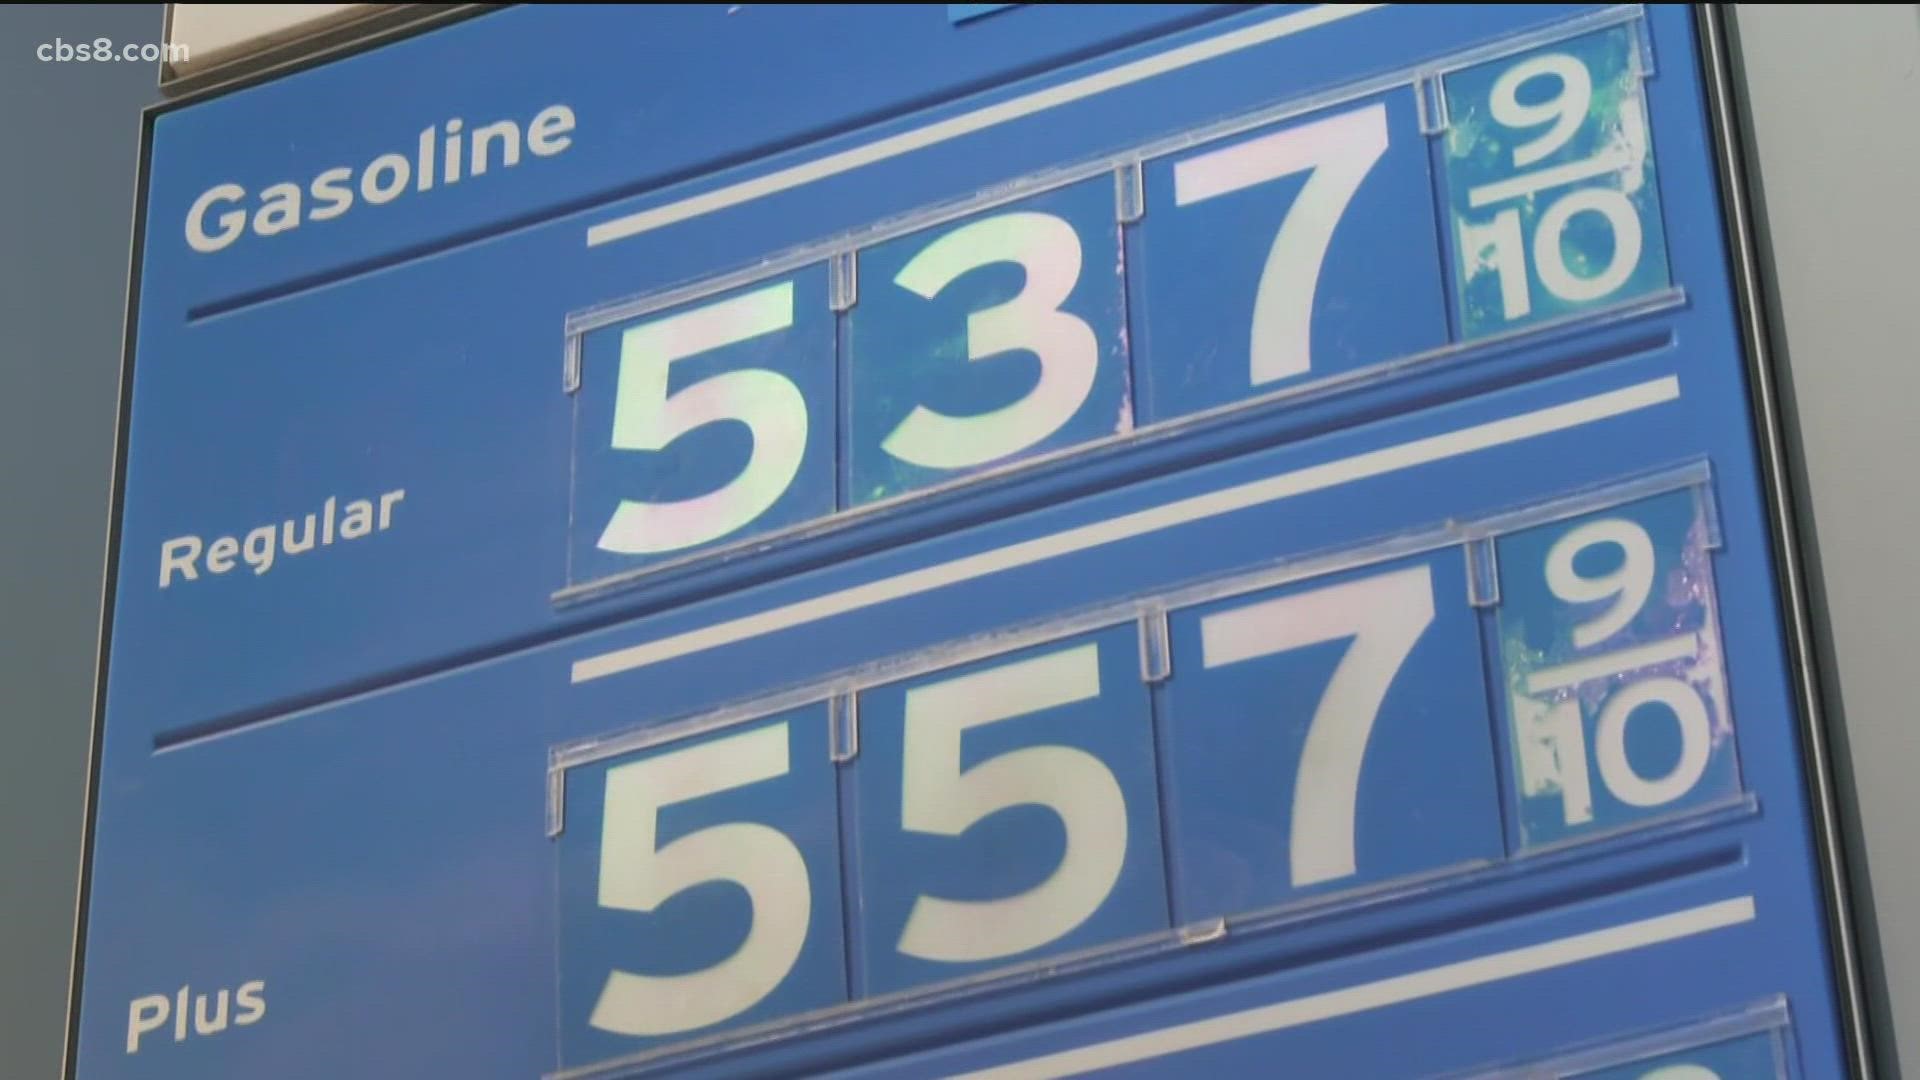 The record setting gas prices in San Diego are especially crushing to rideshare drivers. Many now are even wondering if the job is even worth it anymore.